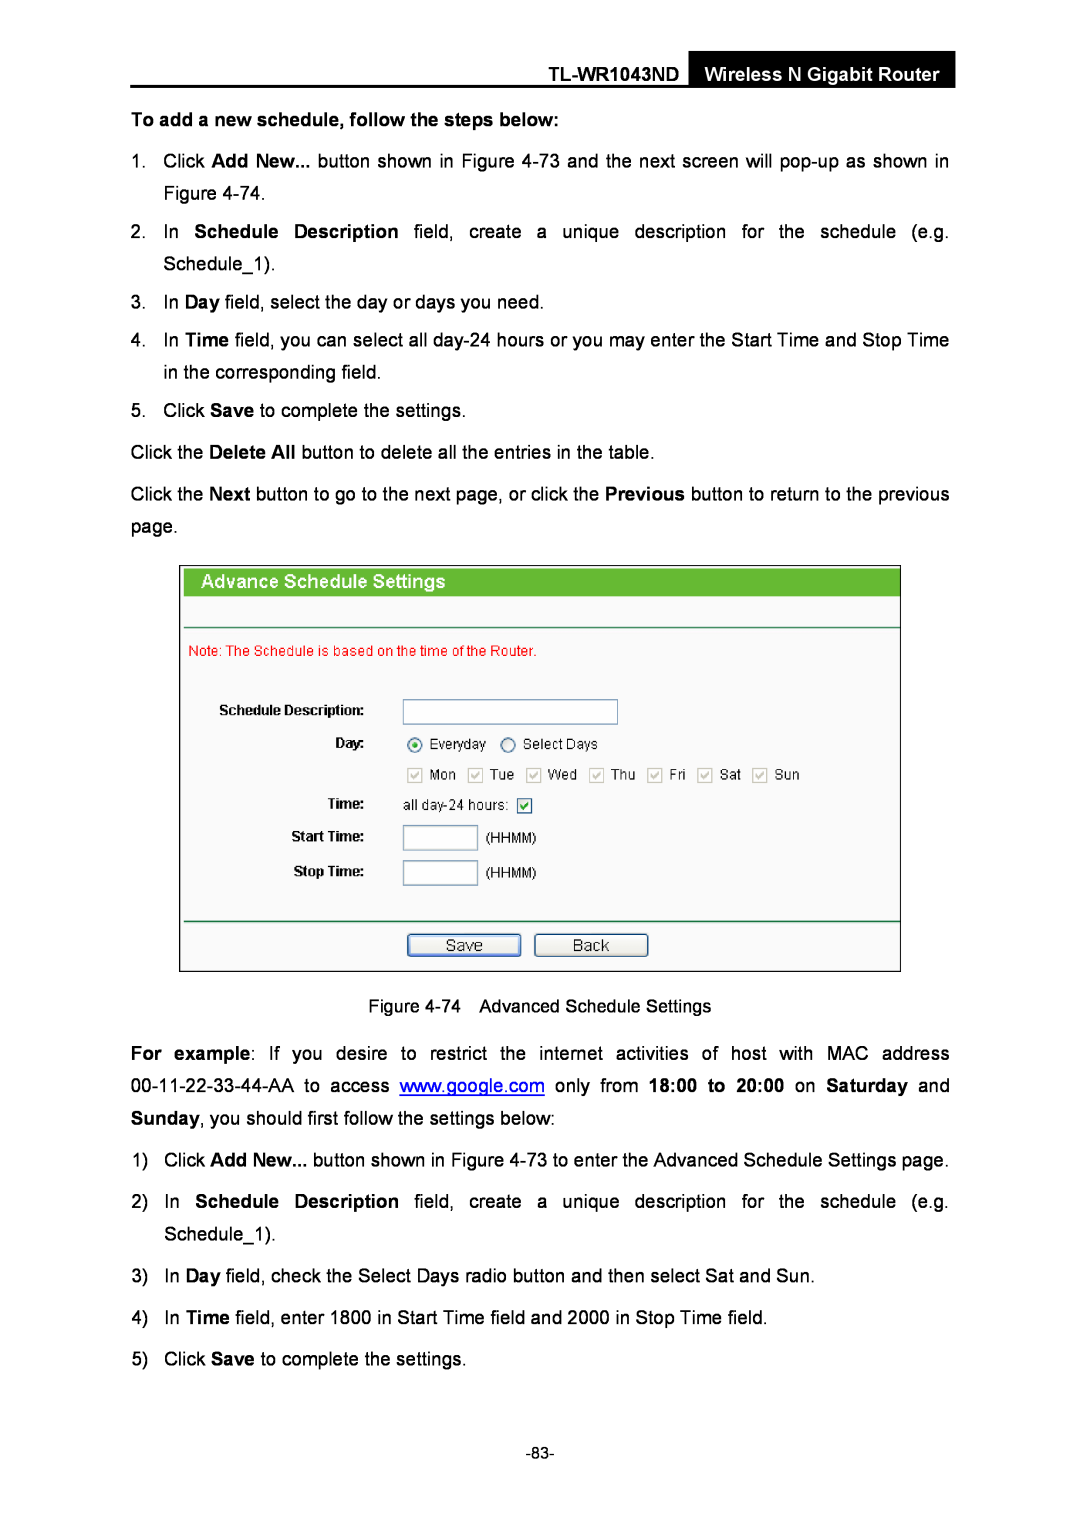 TP-Link manual To add a new schedule, follow the steps below, TL-WR1043ND Wireless N Gigabit Router 